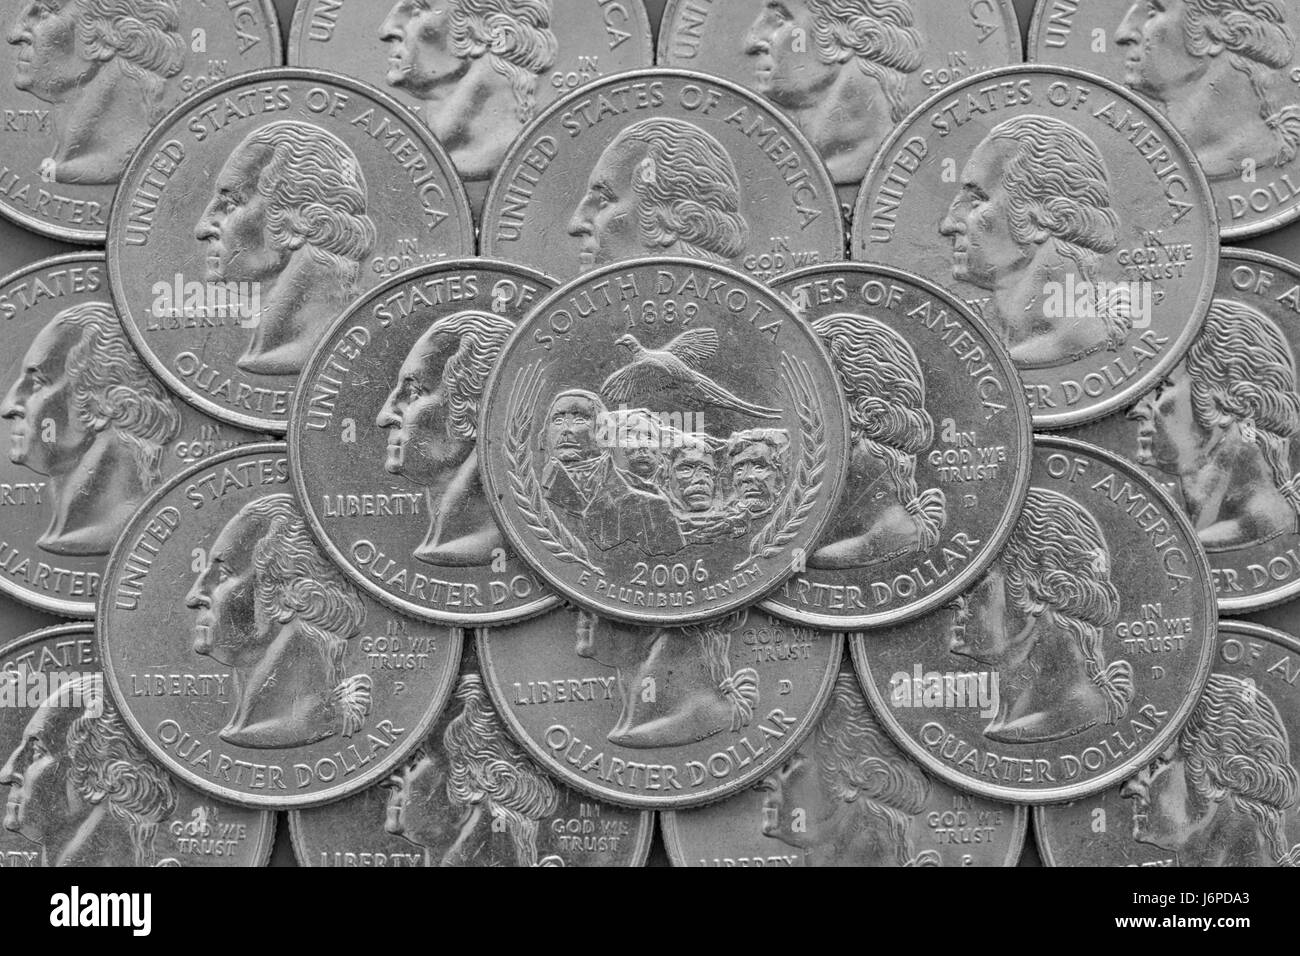 South Dakota State and coins of USA. Pile of the US quarter coins with George Washington and on the top a quarter of South Dakota State. Stock Photo